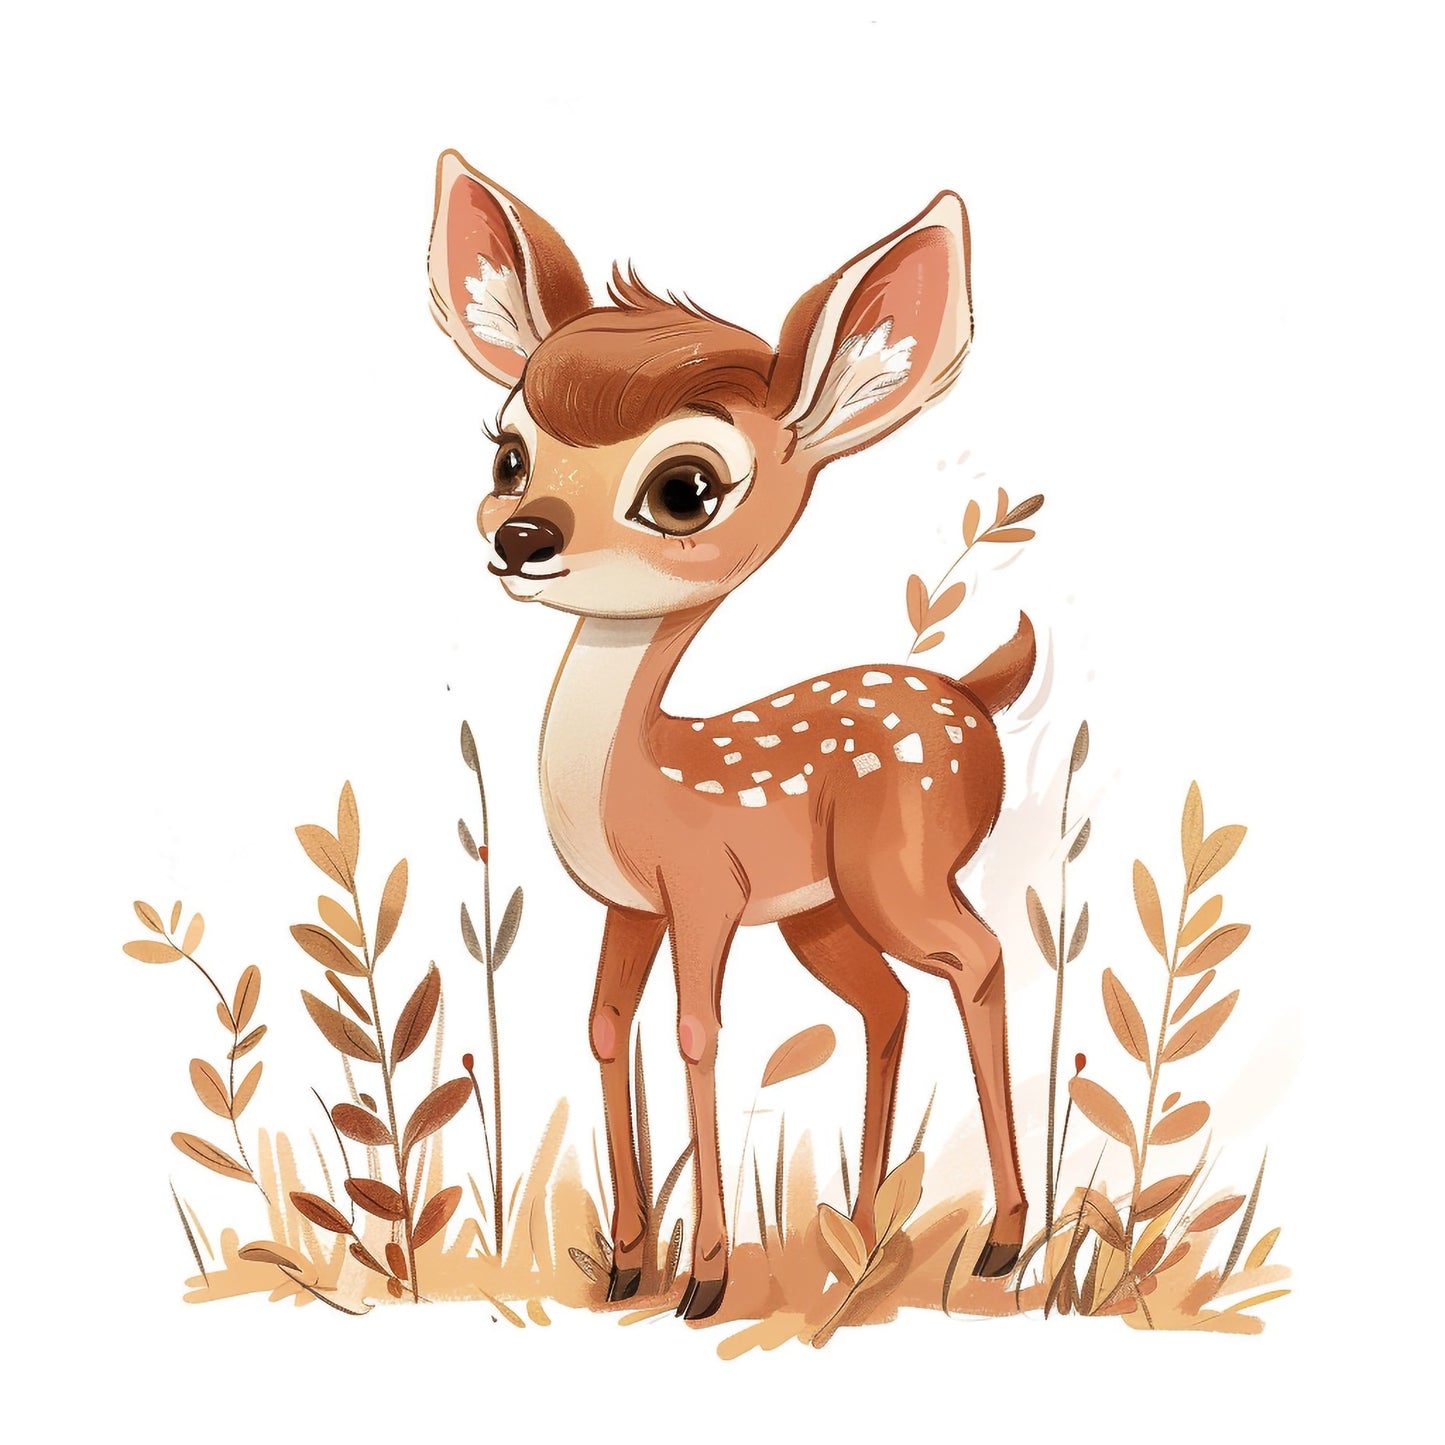 Adorable Illustrated White-Tailed Fawn in a Whimsical Setting